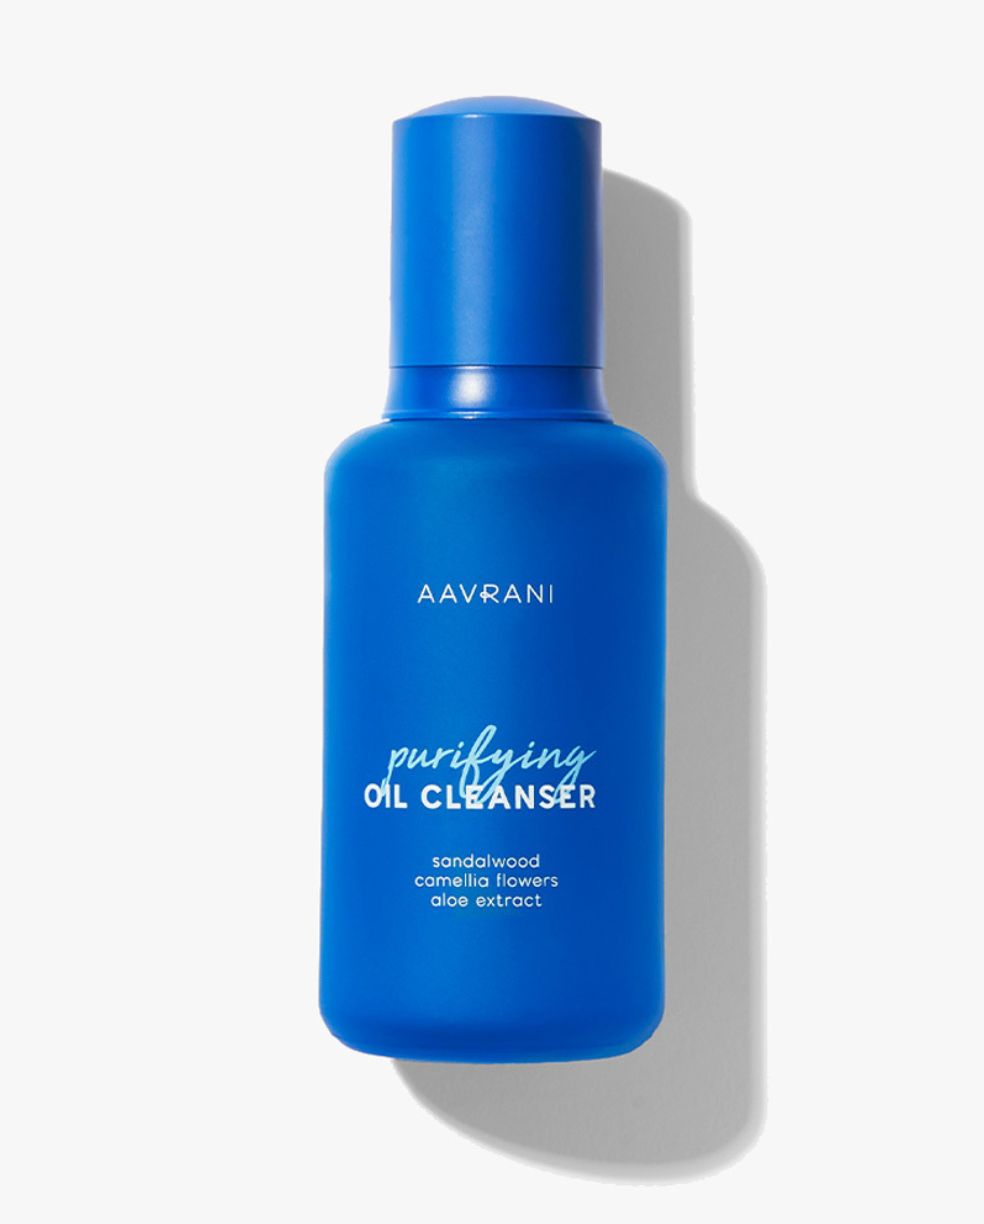 AAVRANI Purifying Oil Cleanser against grey background